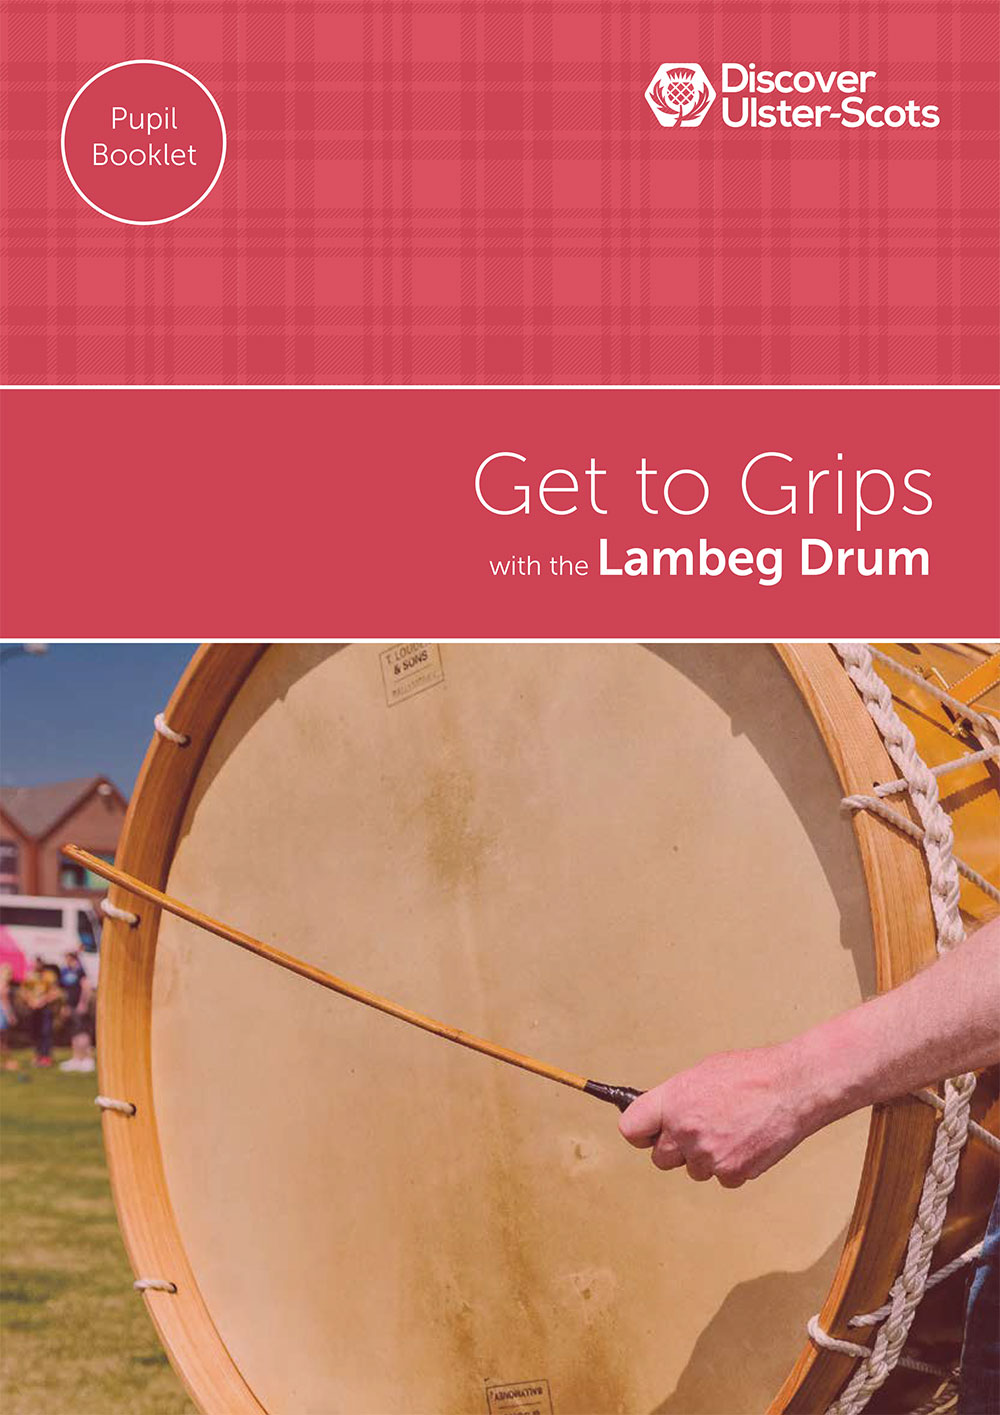 Get to Grips with the Lambeg Drum Pupil Booklet